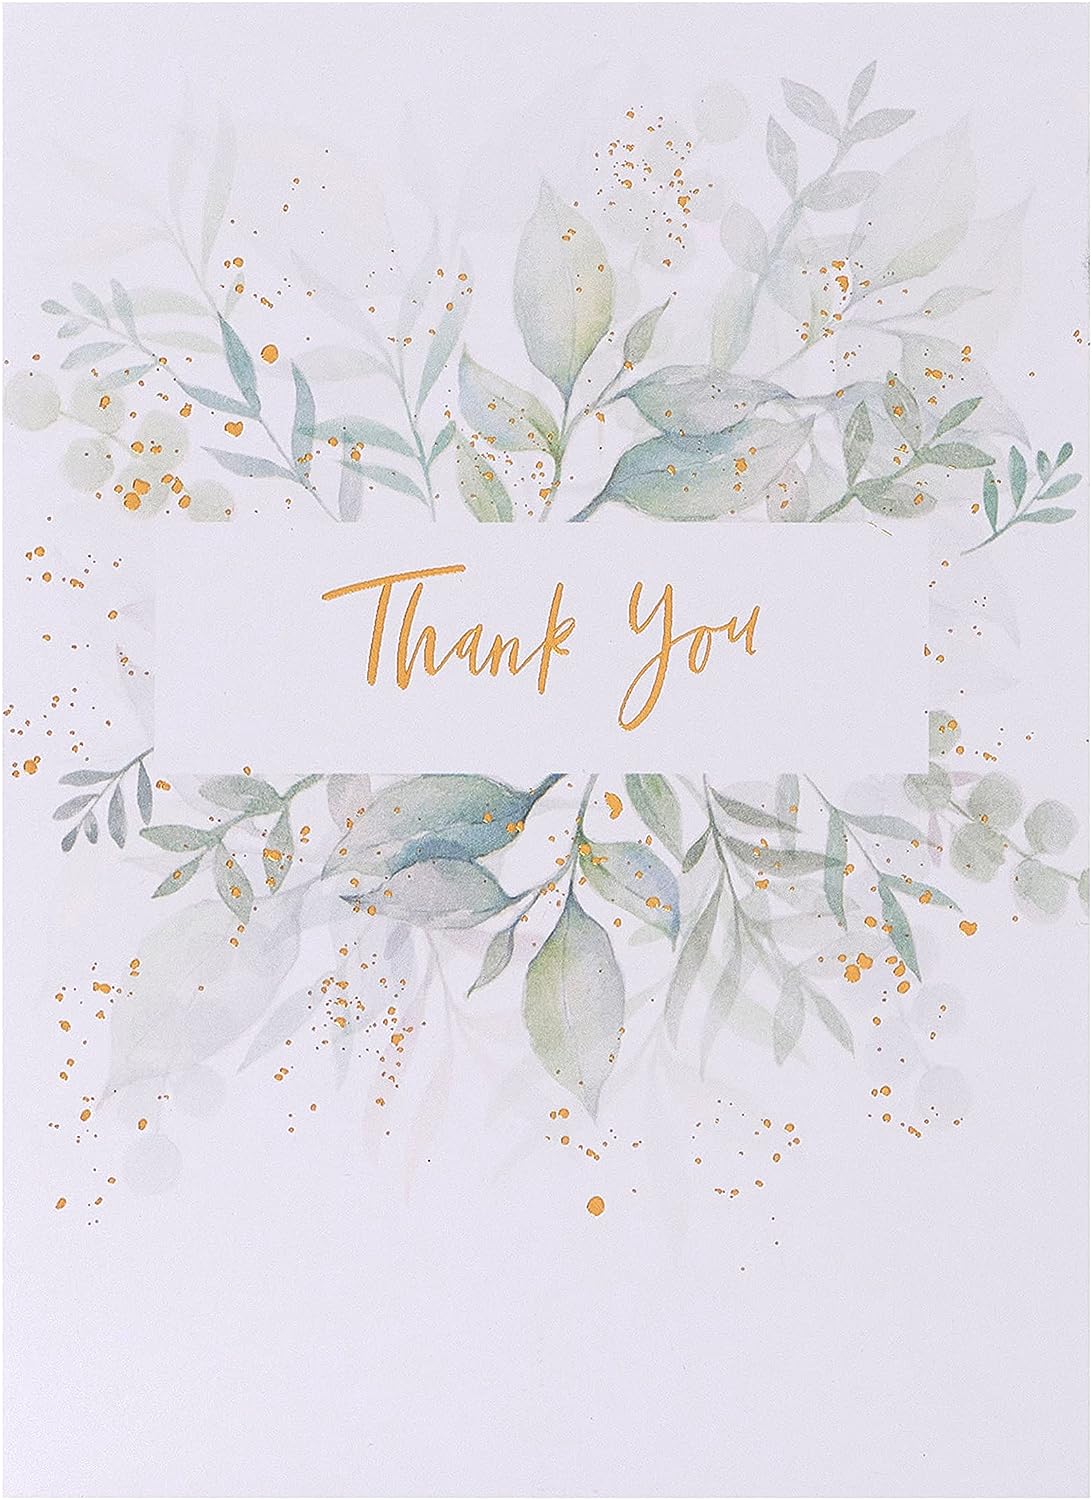 Botanical Design Multipack of 10 Thank You Cards with Envelopes